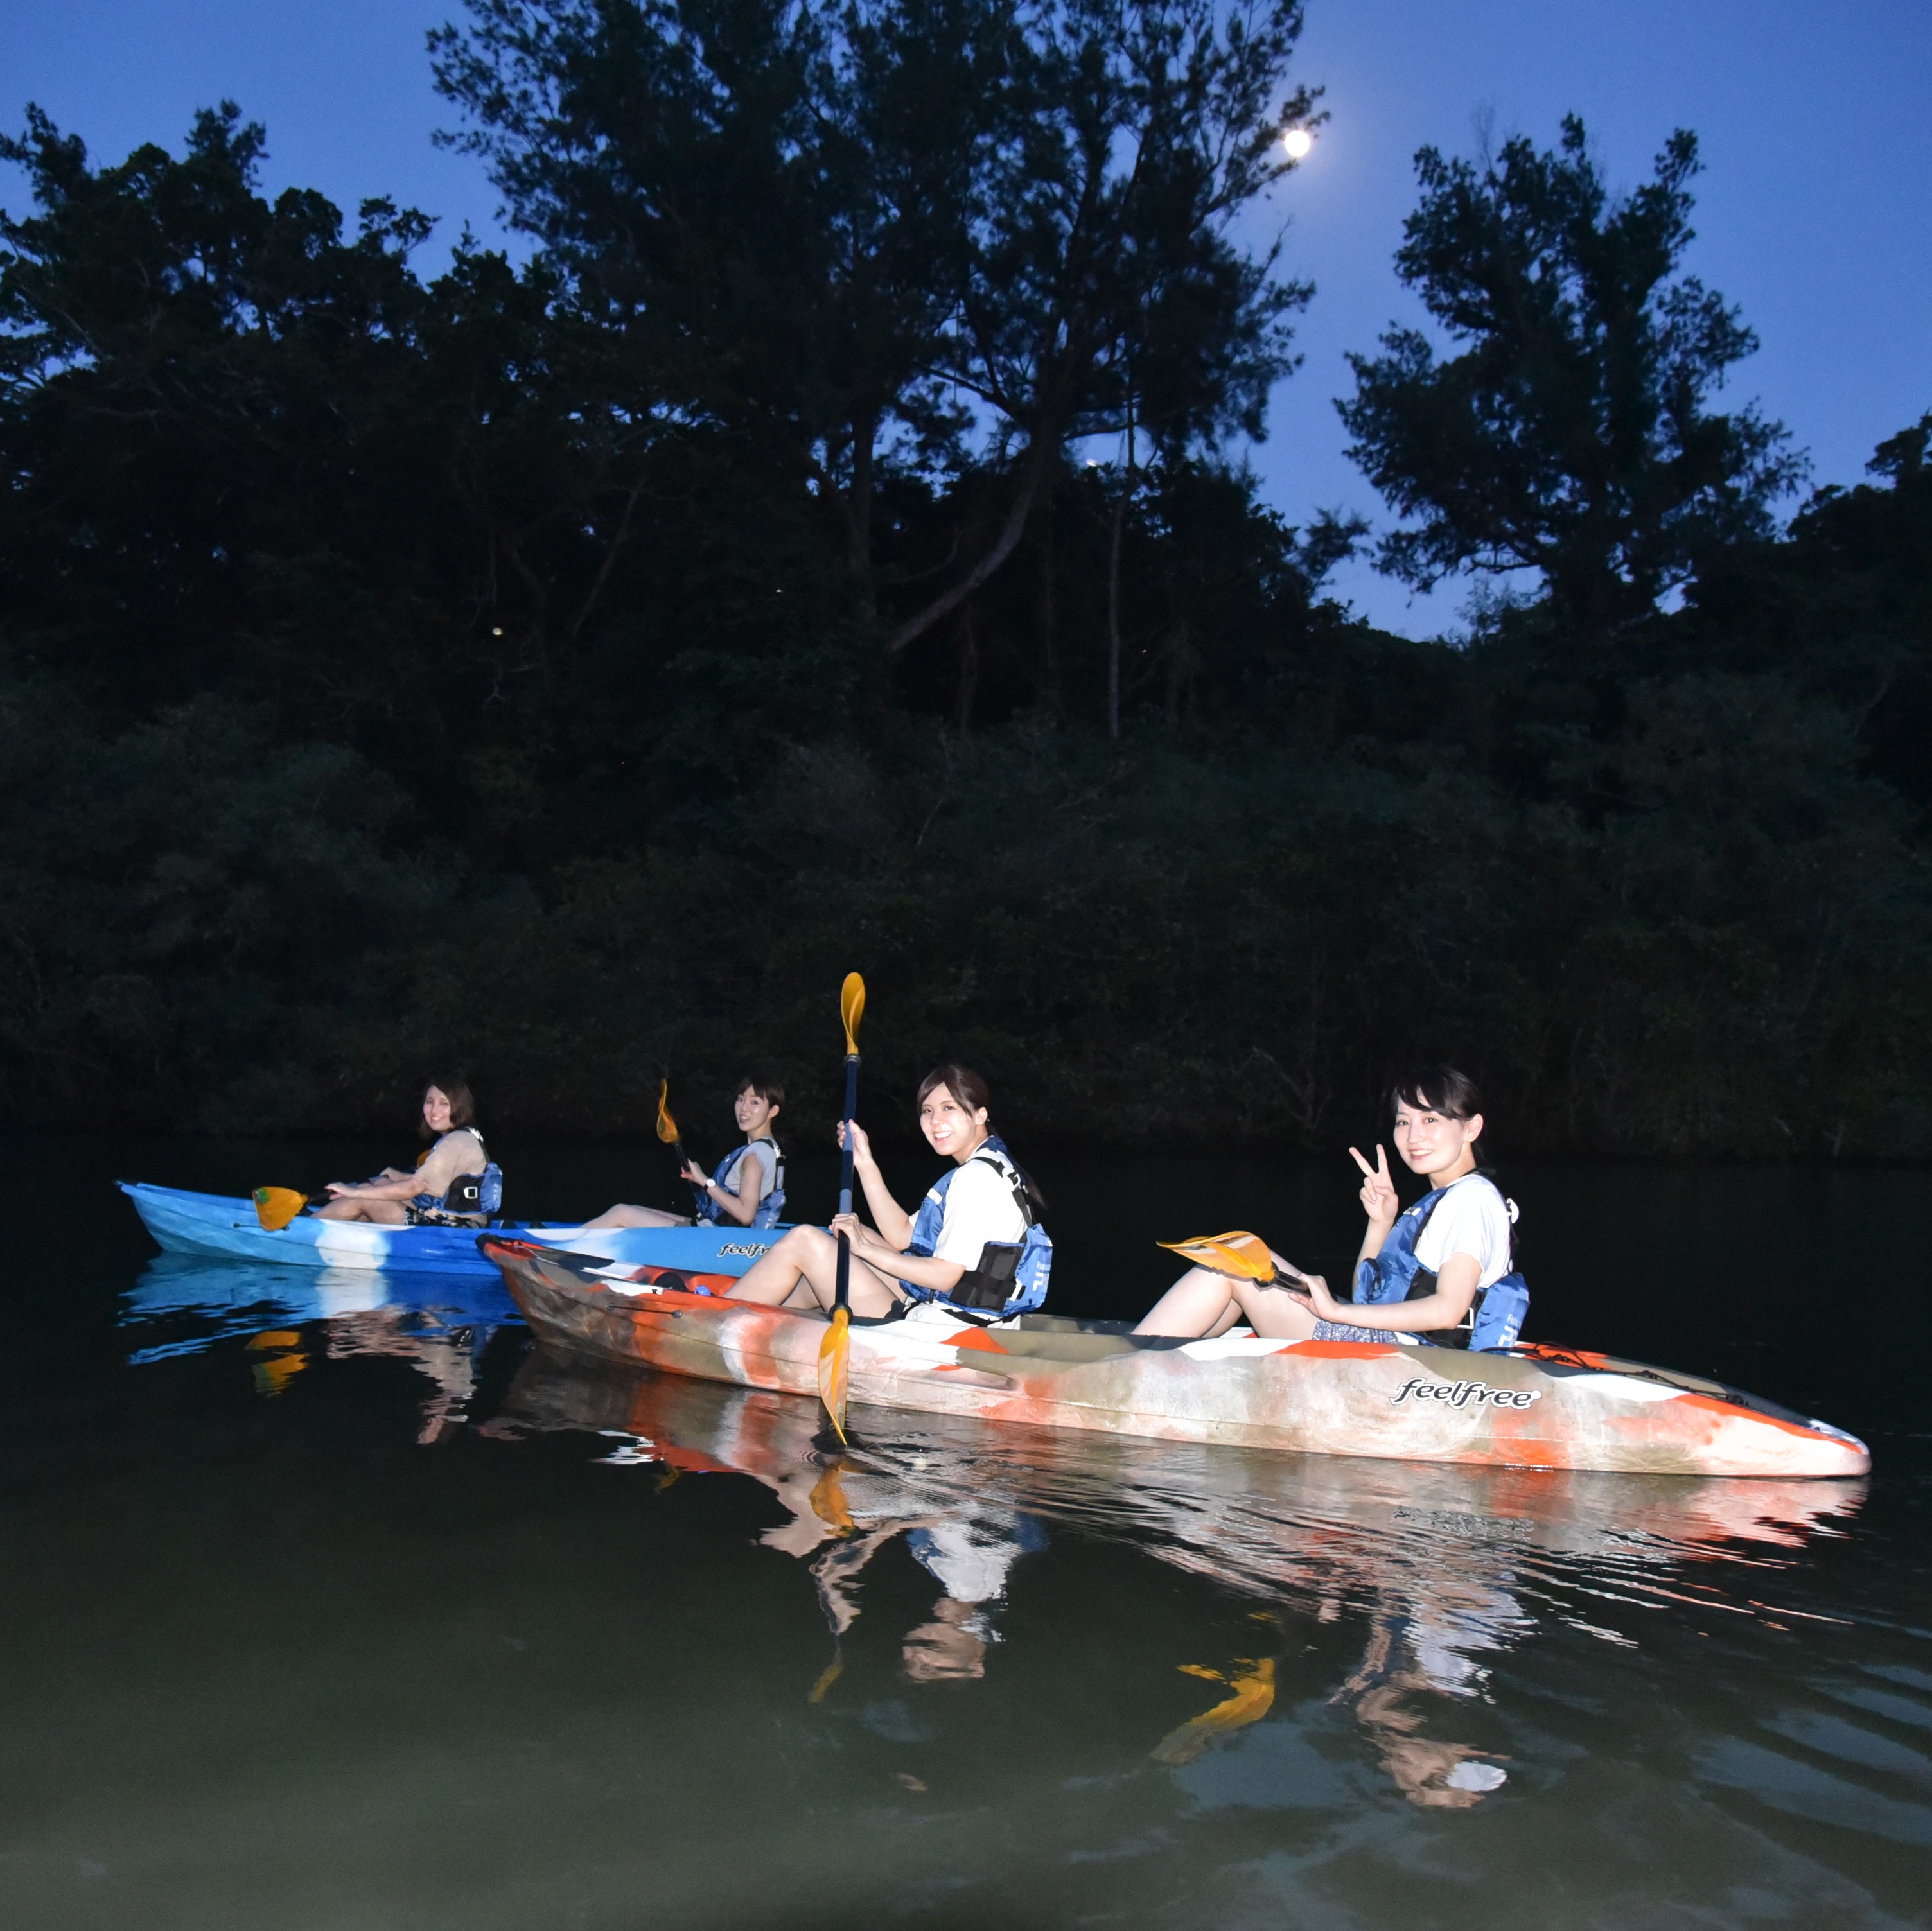 Night Kayak Tour. Good Deal for 4 people or more♪ Easy access, held in the central area of Okinawa【Group discount】